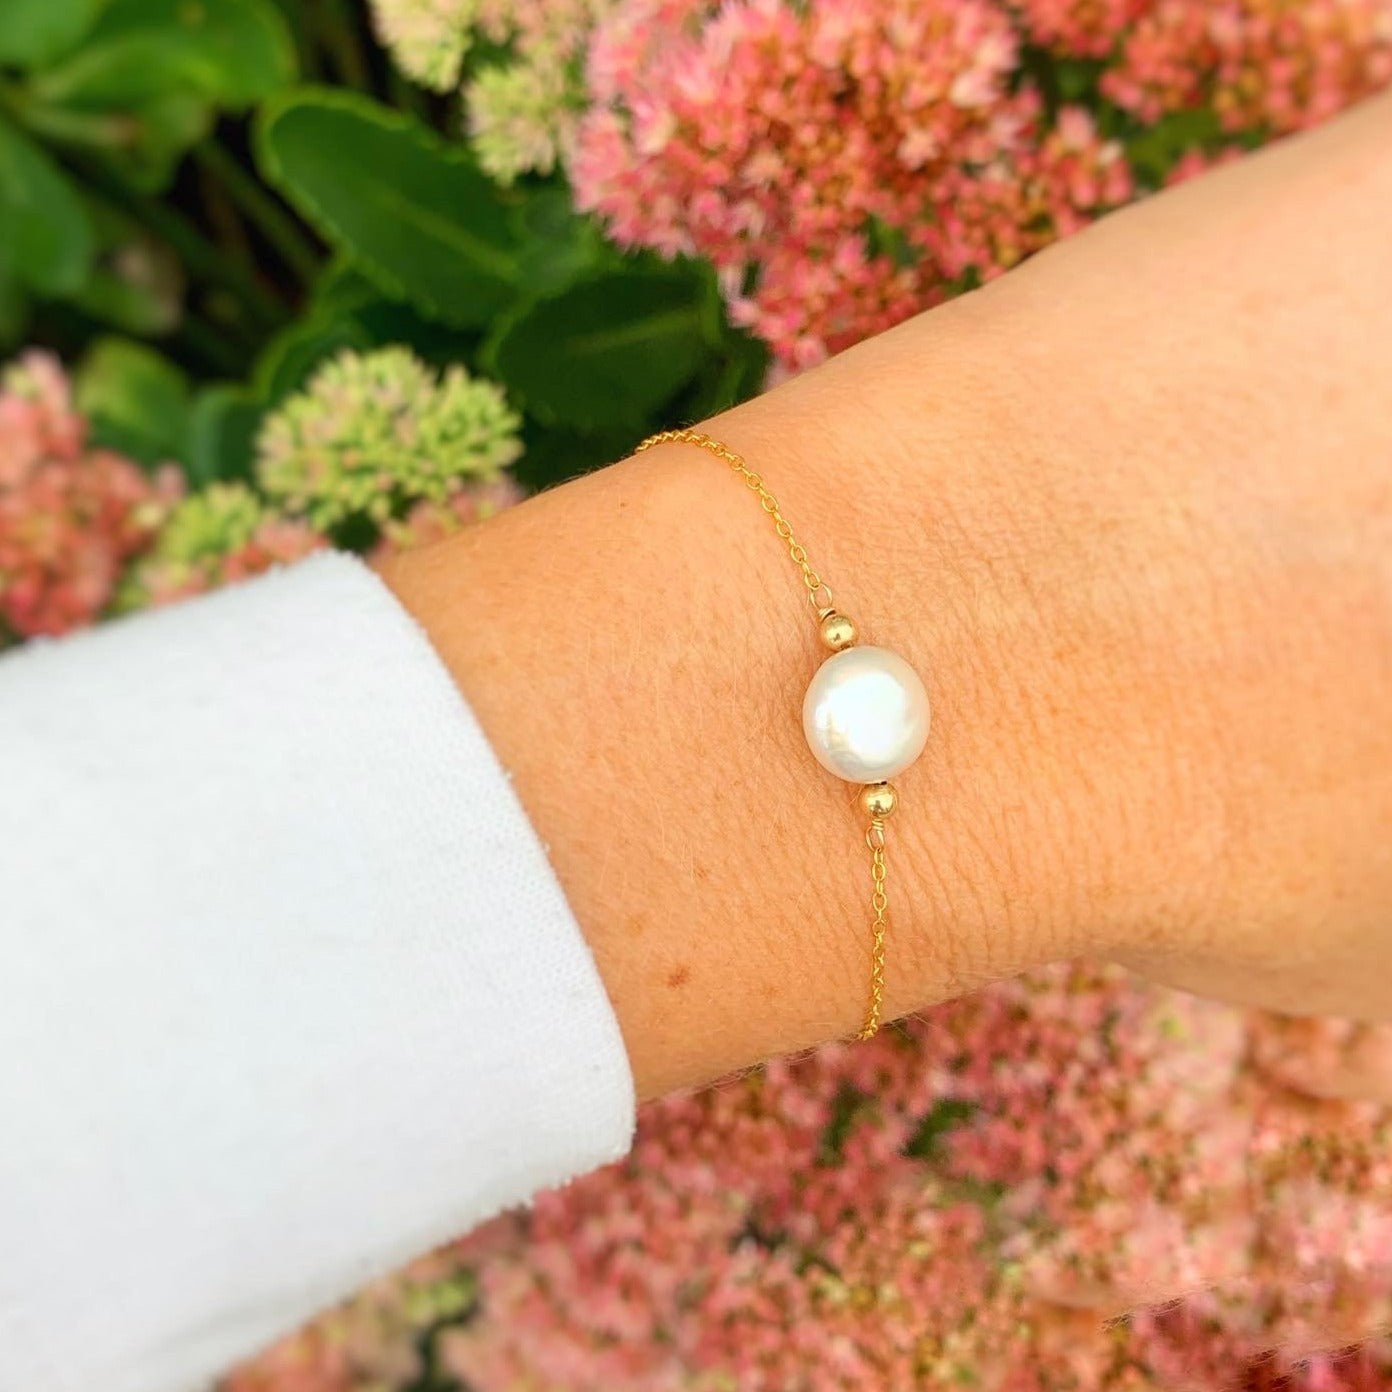 Newport coin pearl bracelet by Mermaids and Madeleines features a freshwater coin pearl and 14k gold filled beads, chain and findings. This bracelet is pictured on a wrist with a blurred pink flower in the background